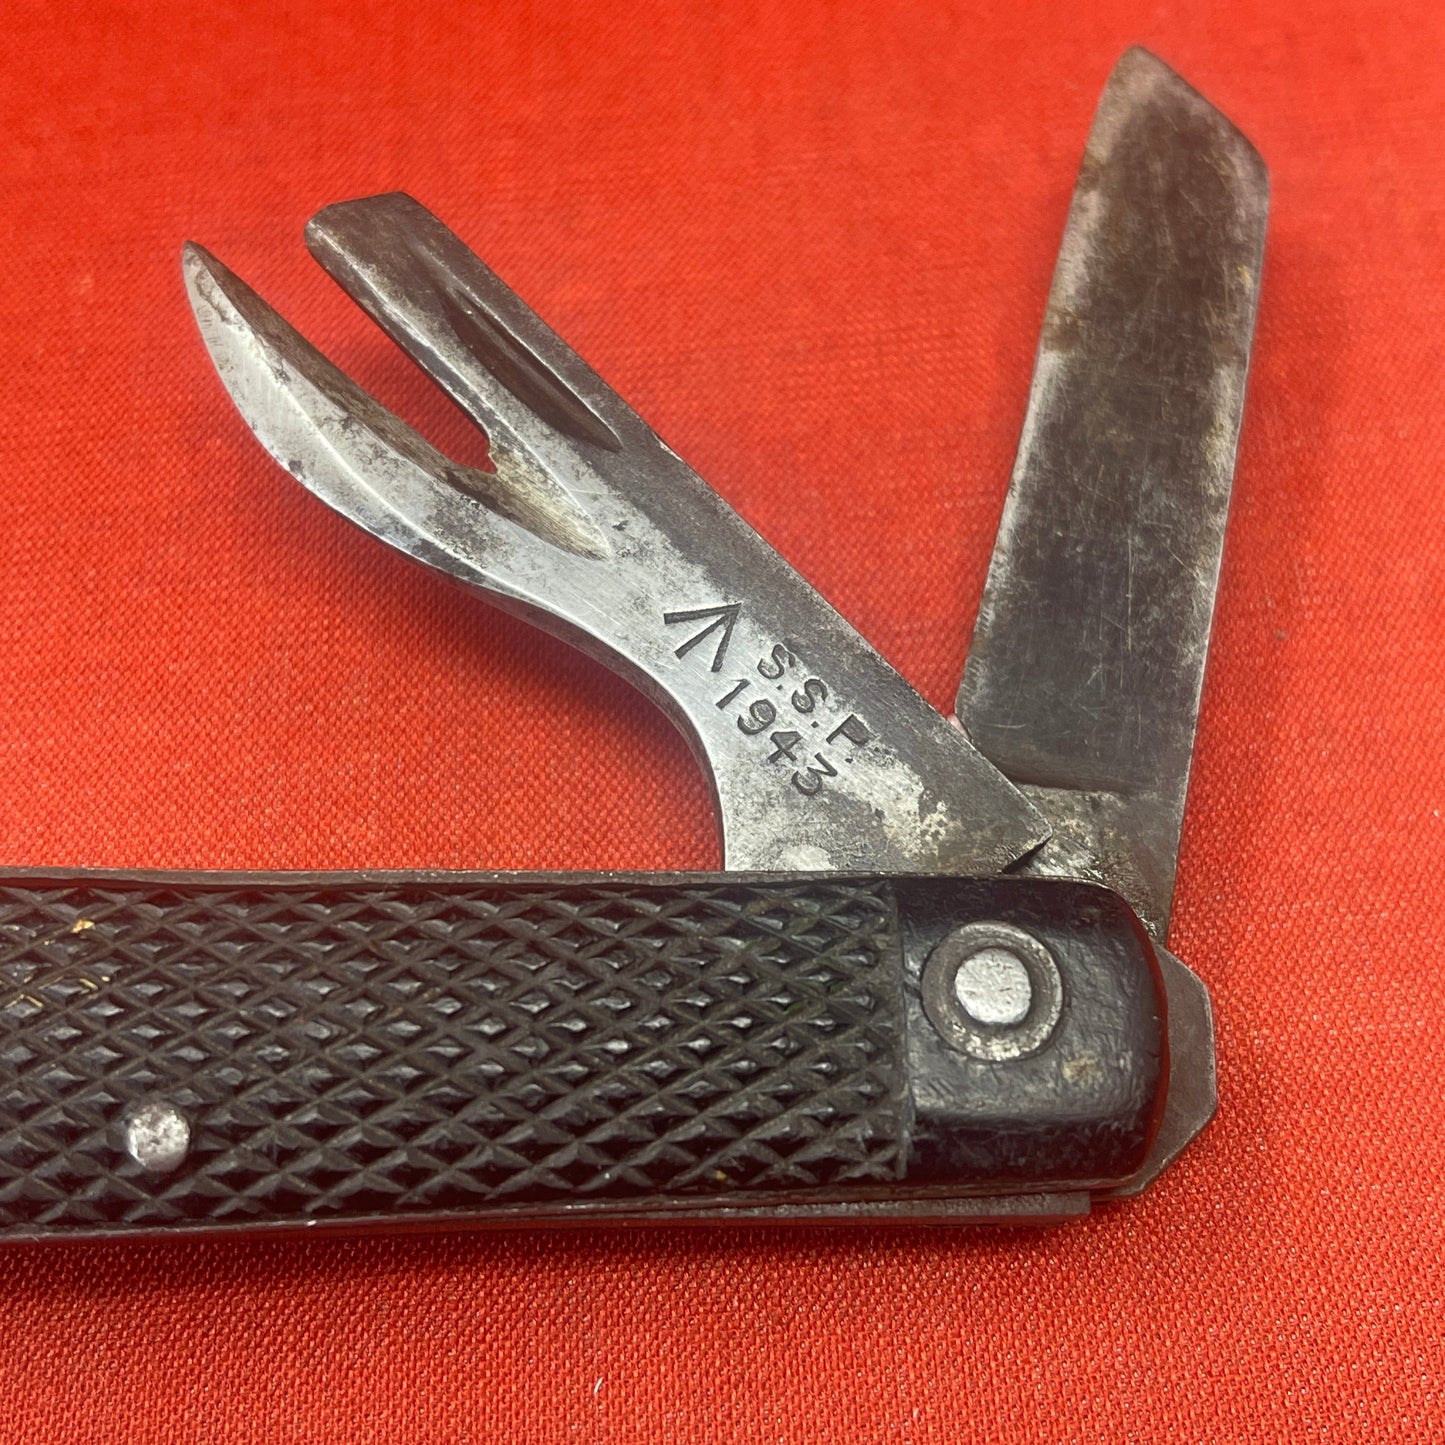 A nice example of a British 1943 Dated Pocket Jack Knife Made by SSP The blades are in good condition, the chequered Bakelite grip is intact ( There is a small piece missing to the left side ) and all the blades lock and close as they should. The steel can opener is in good condition